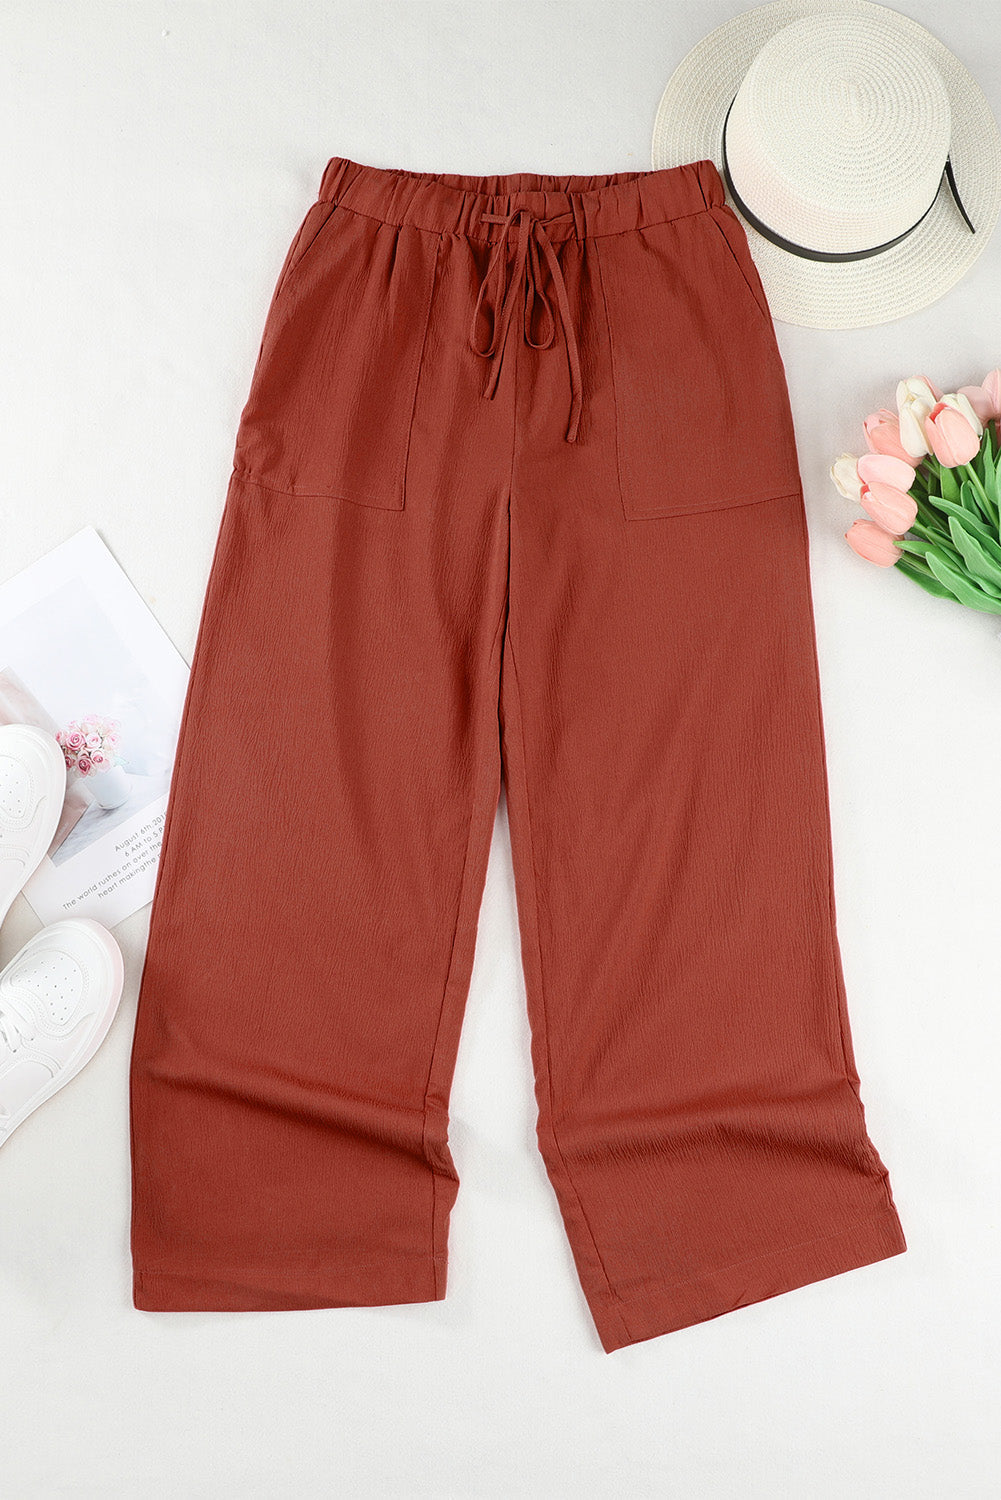 Crinkled Wide Leg Pants - Red / S - Bottoms - Pants - 10 - 2024